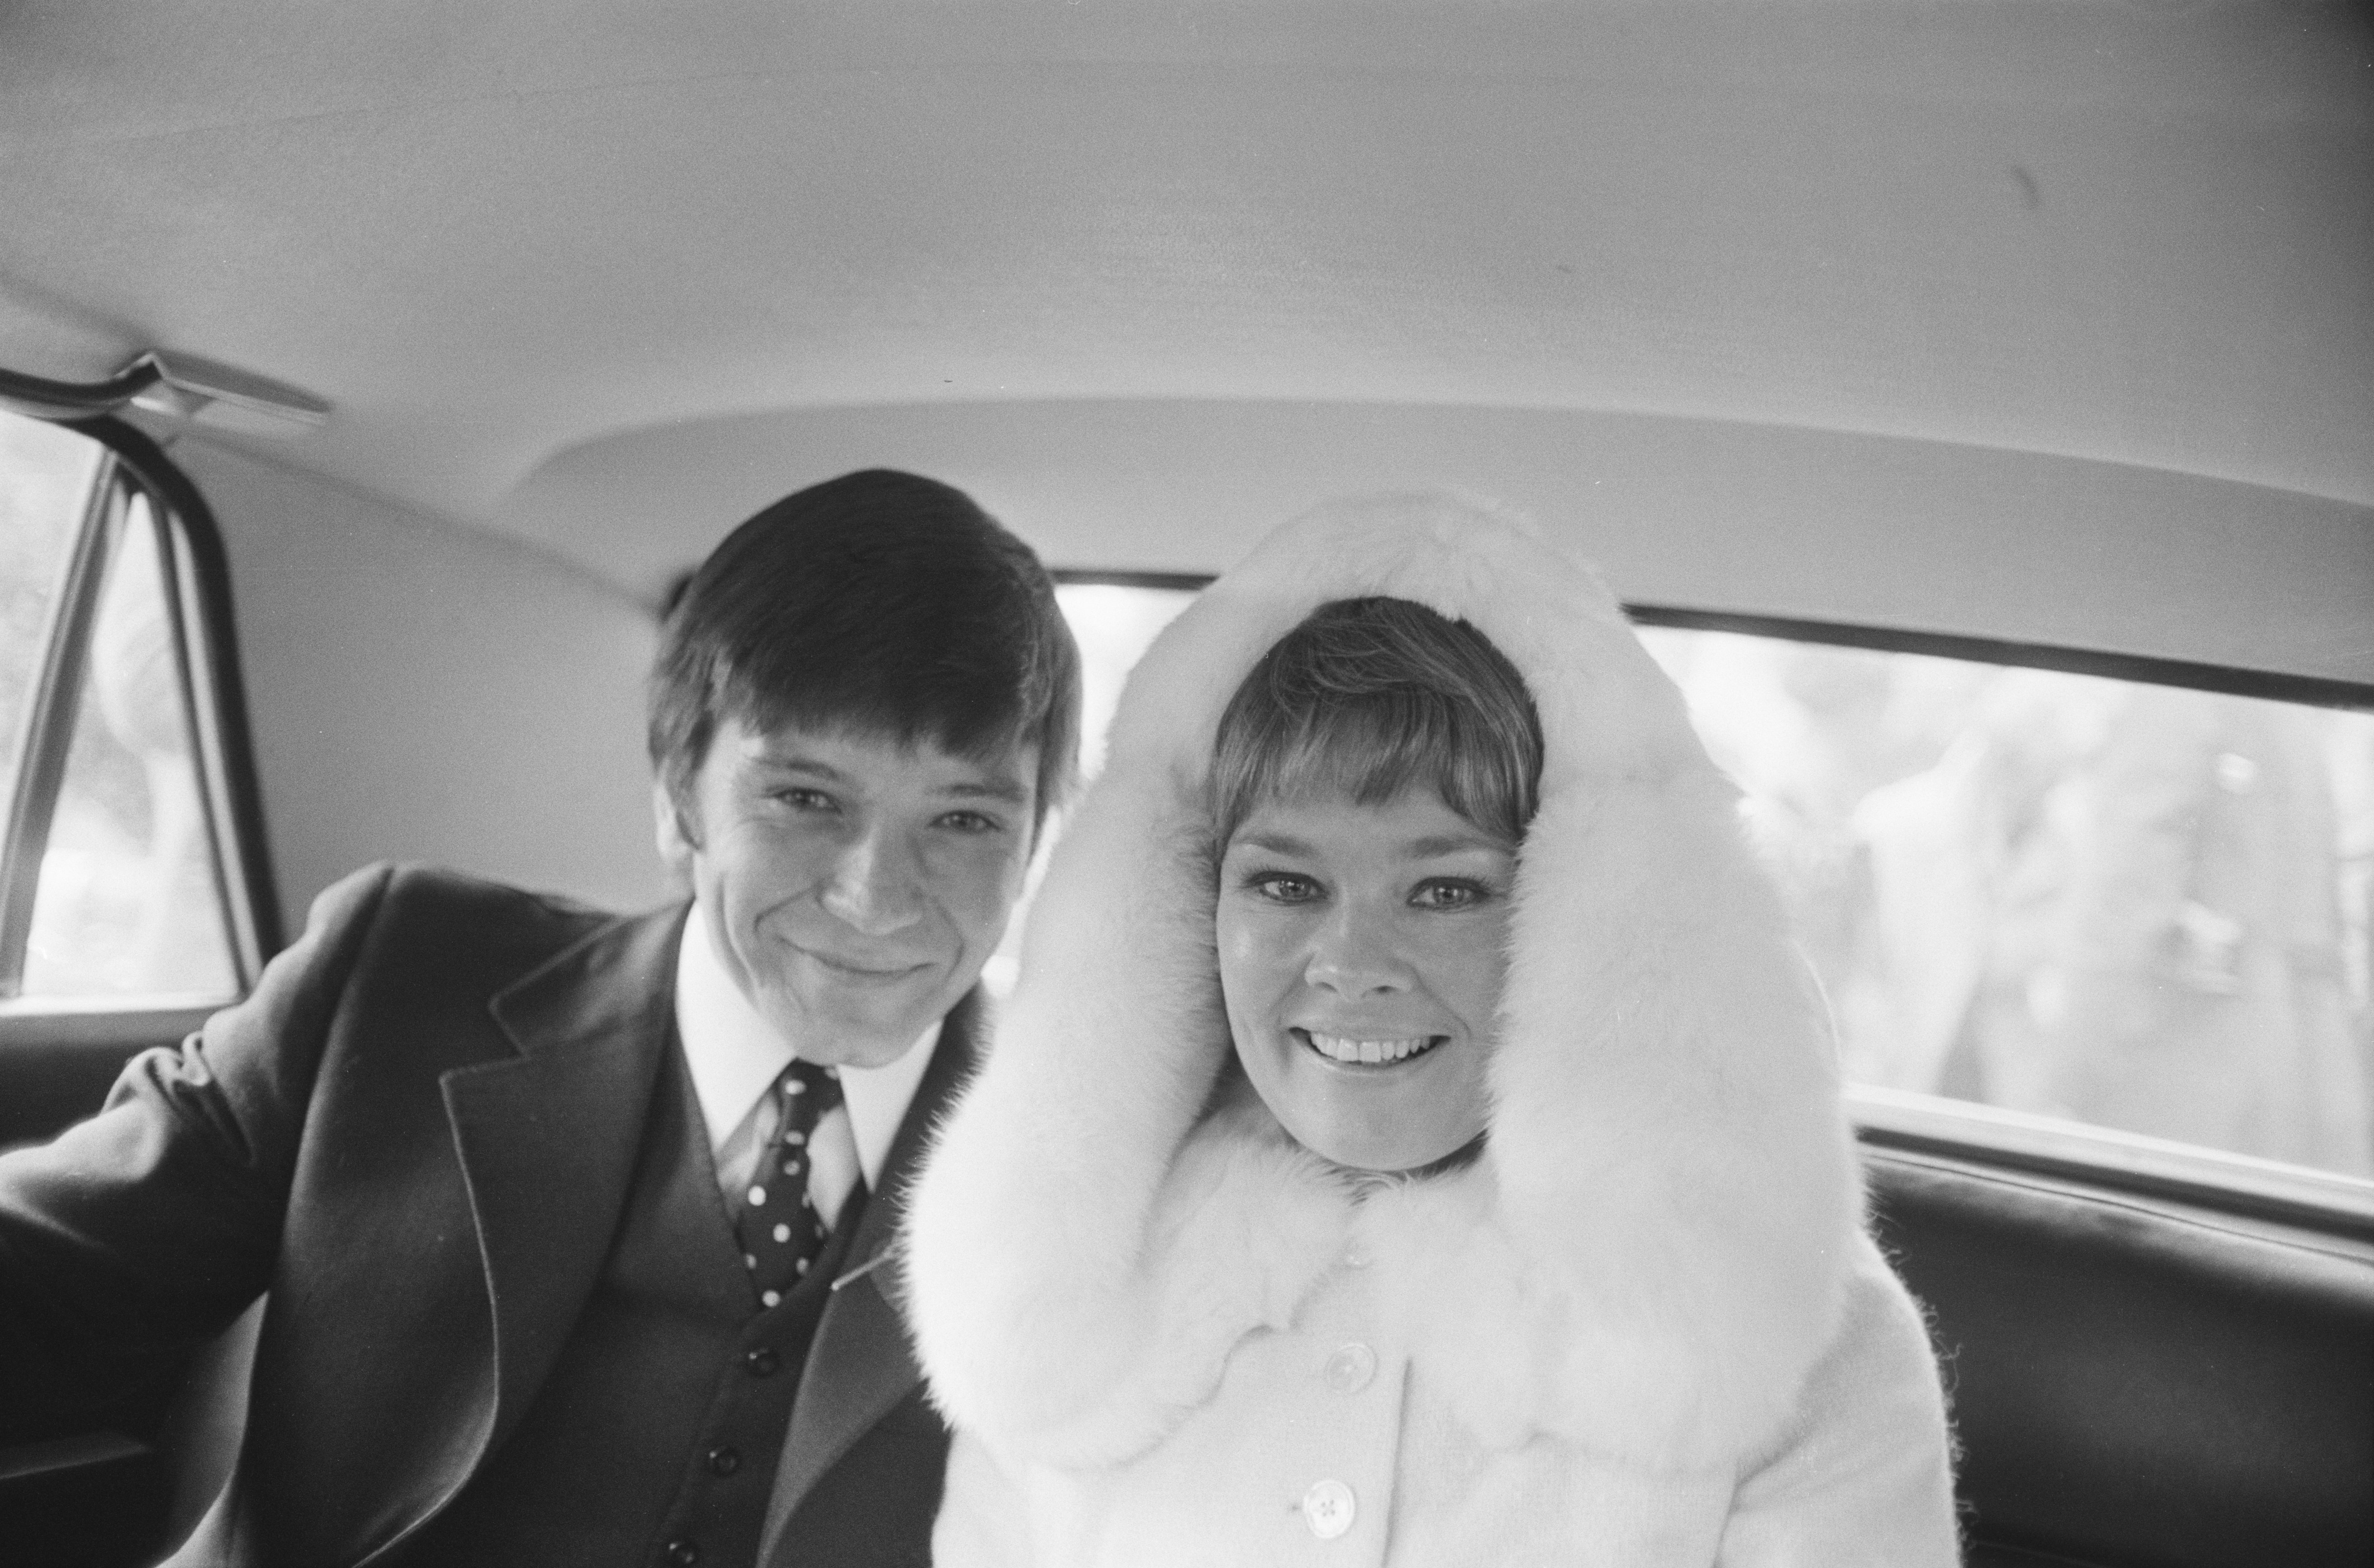 English actress Judi Dench marries actor Michael Williams (1935 - 2001) at St Mary's Church, Hampstead, London, February 5, 1971. | Source: Getty Images